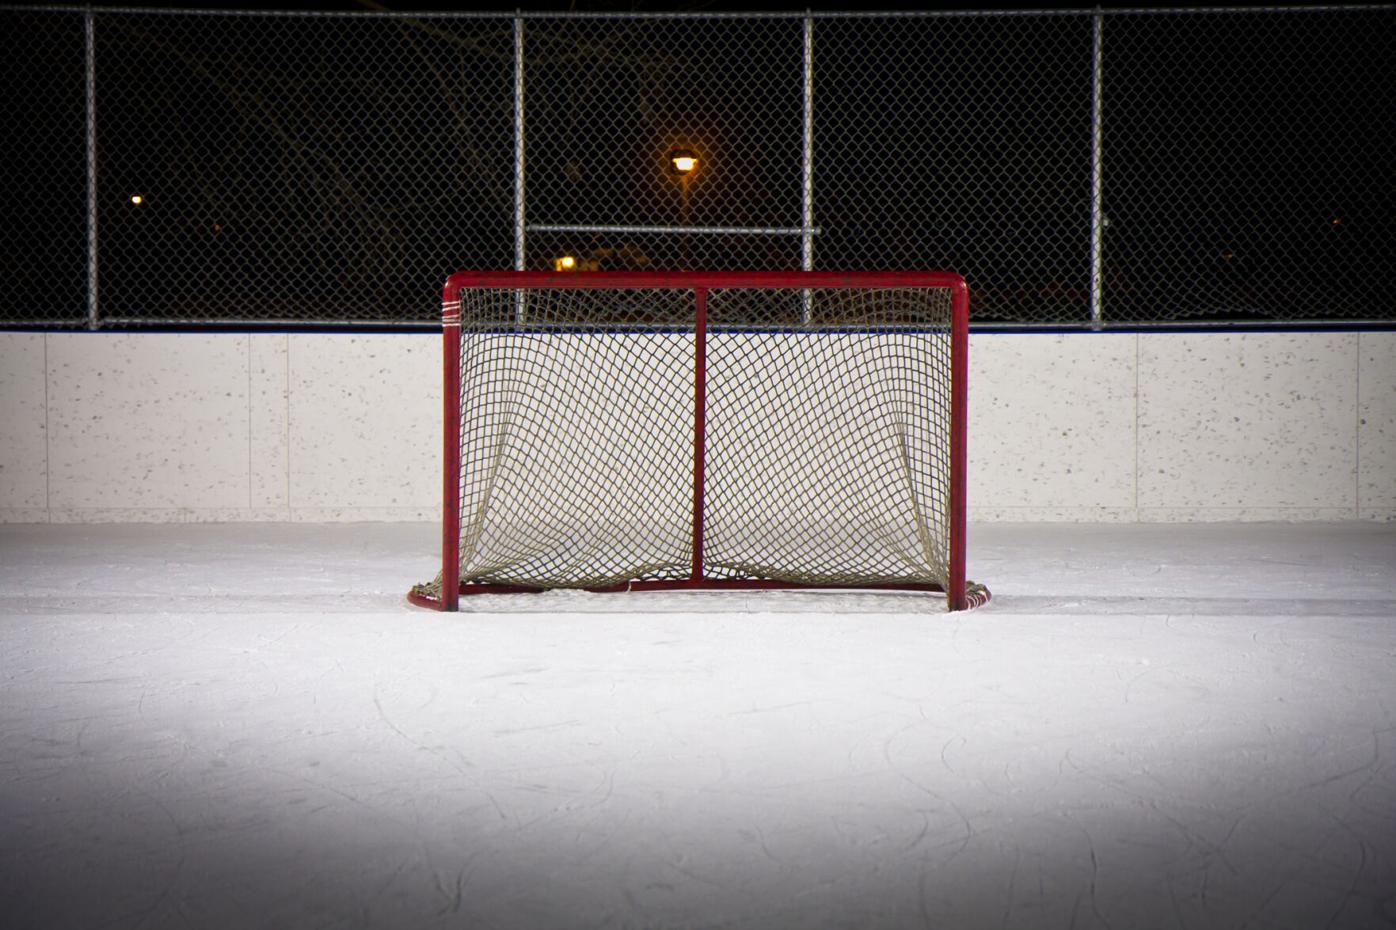 Young hockey player dies after being hit in head by puck